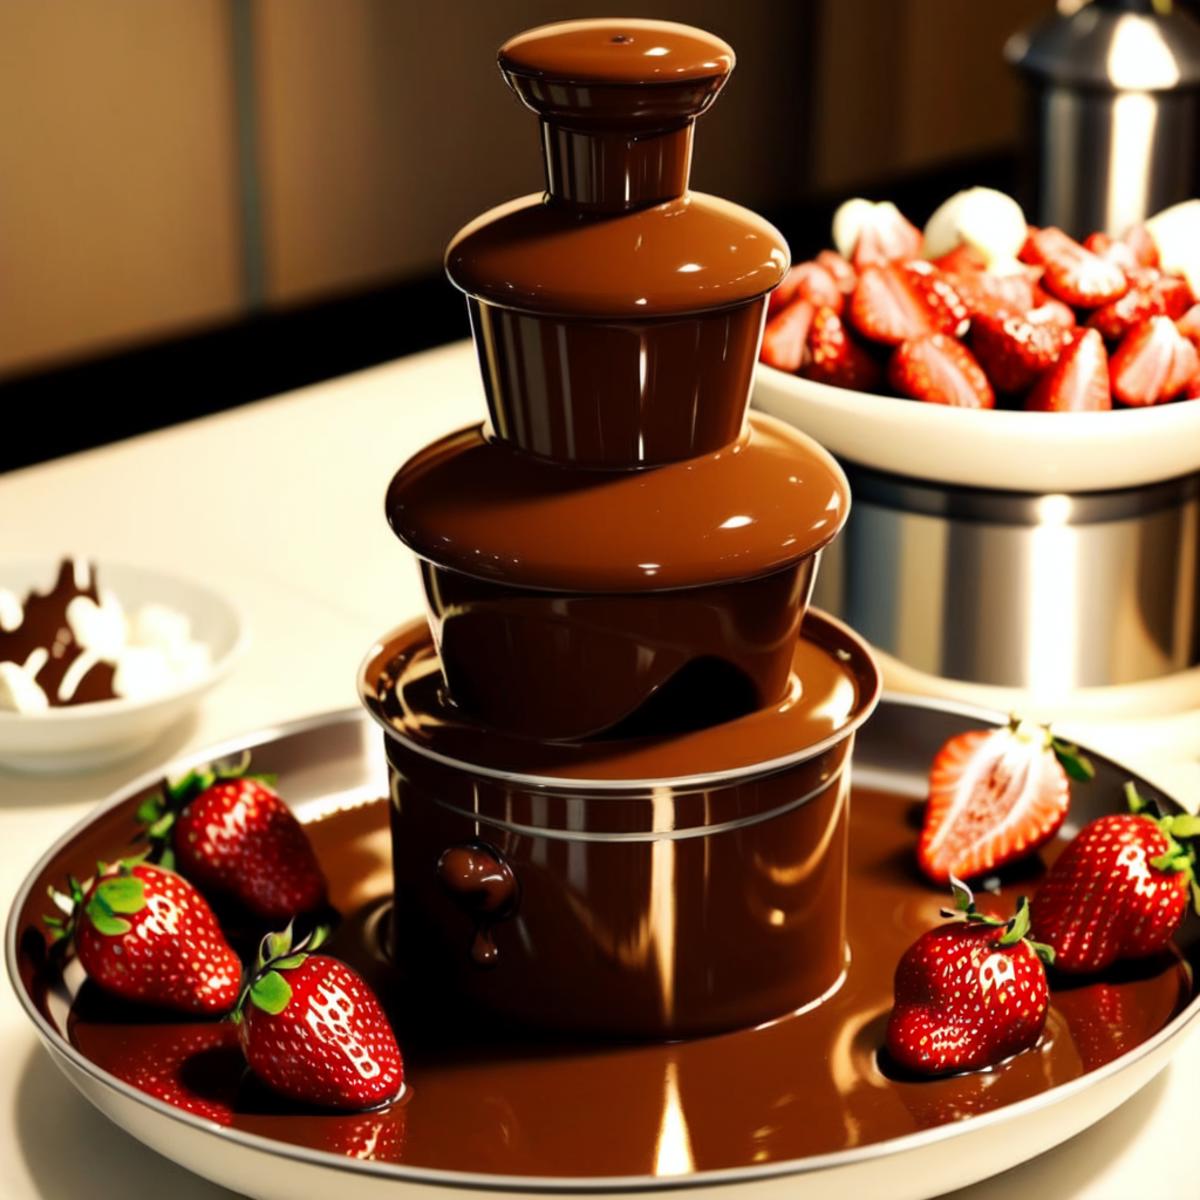 chocolate fountain image by Liquidn2